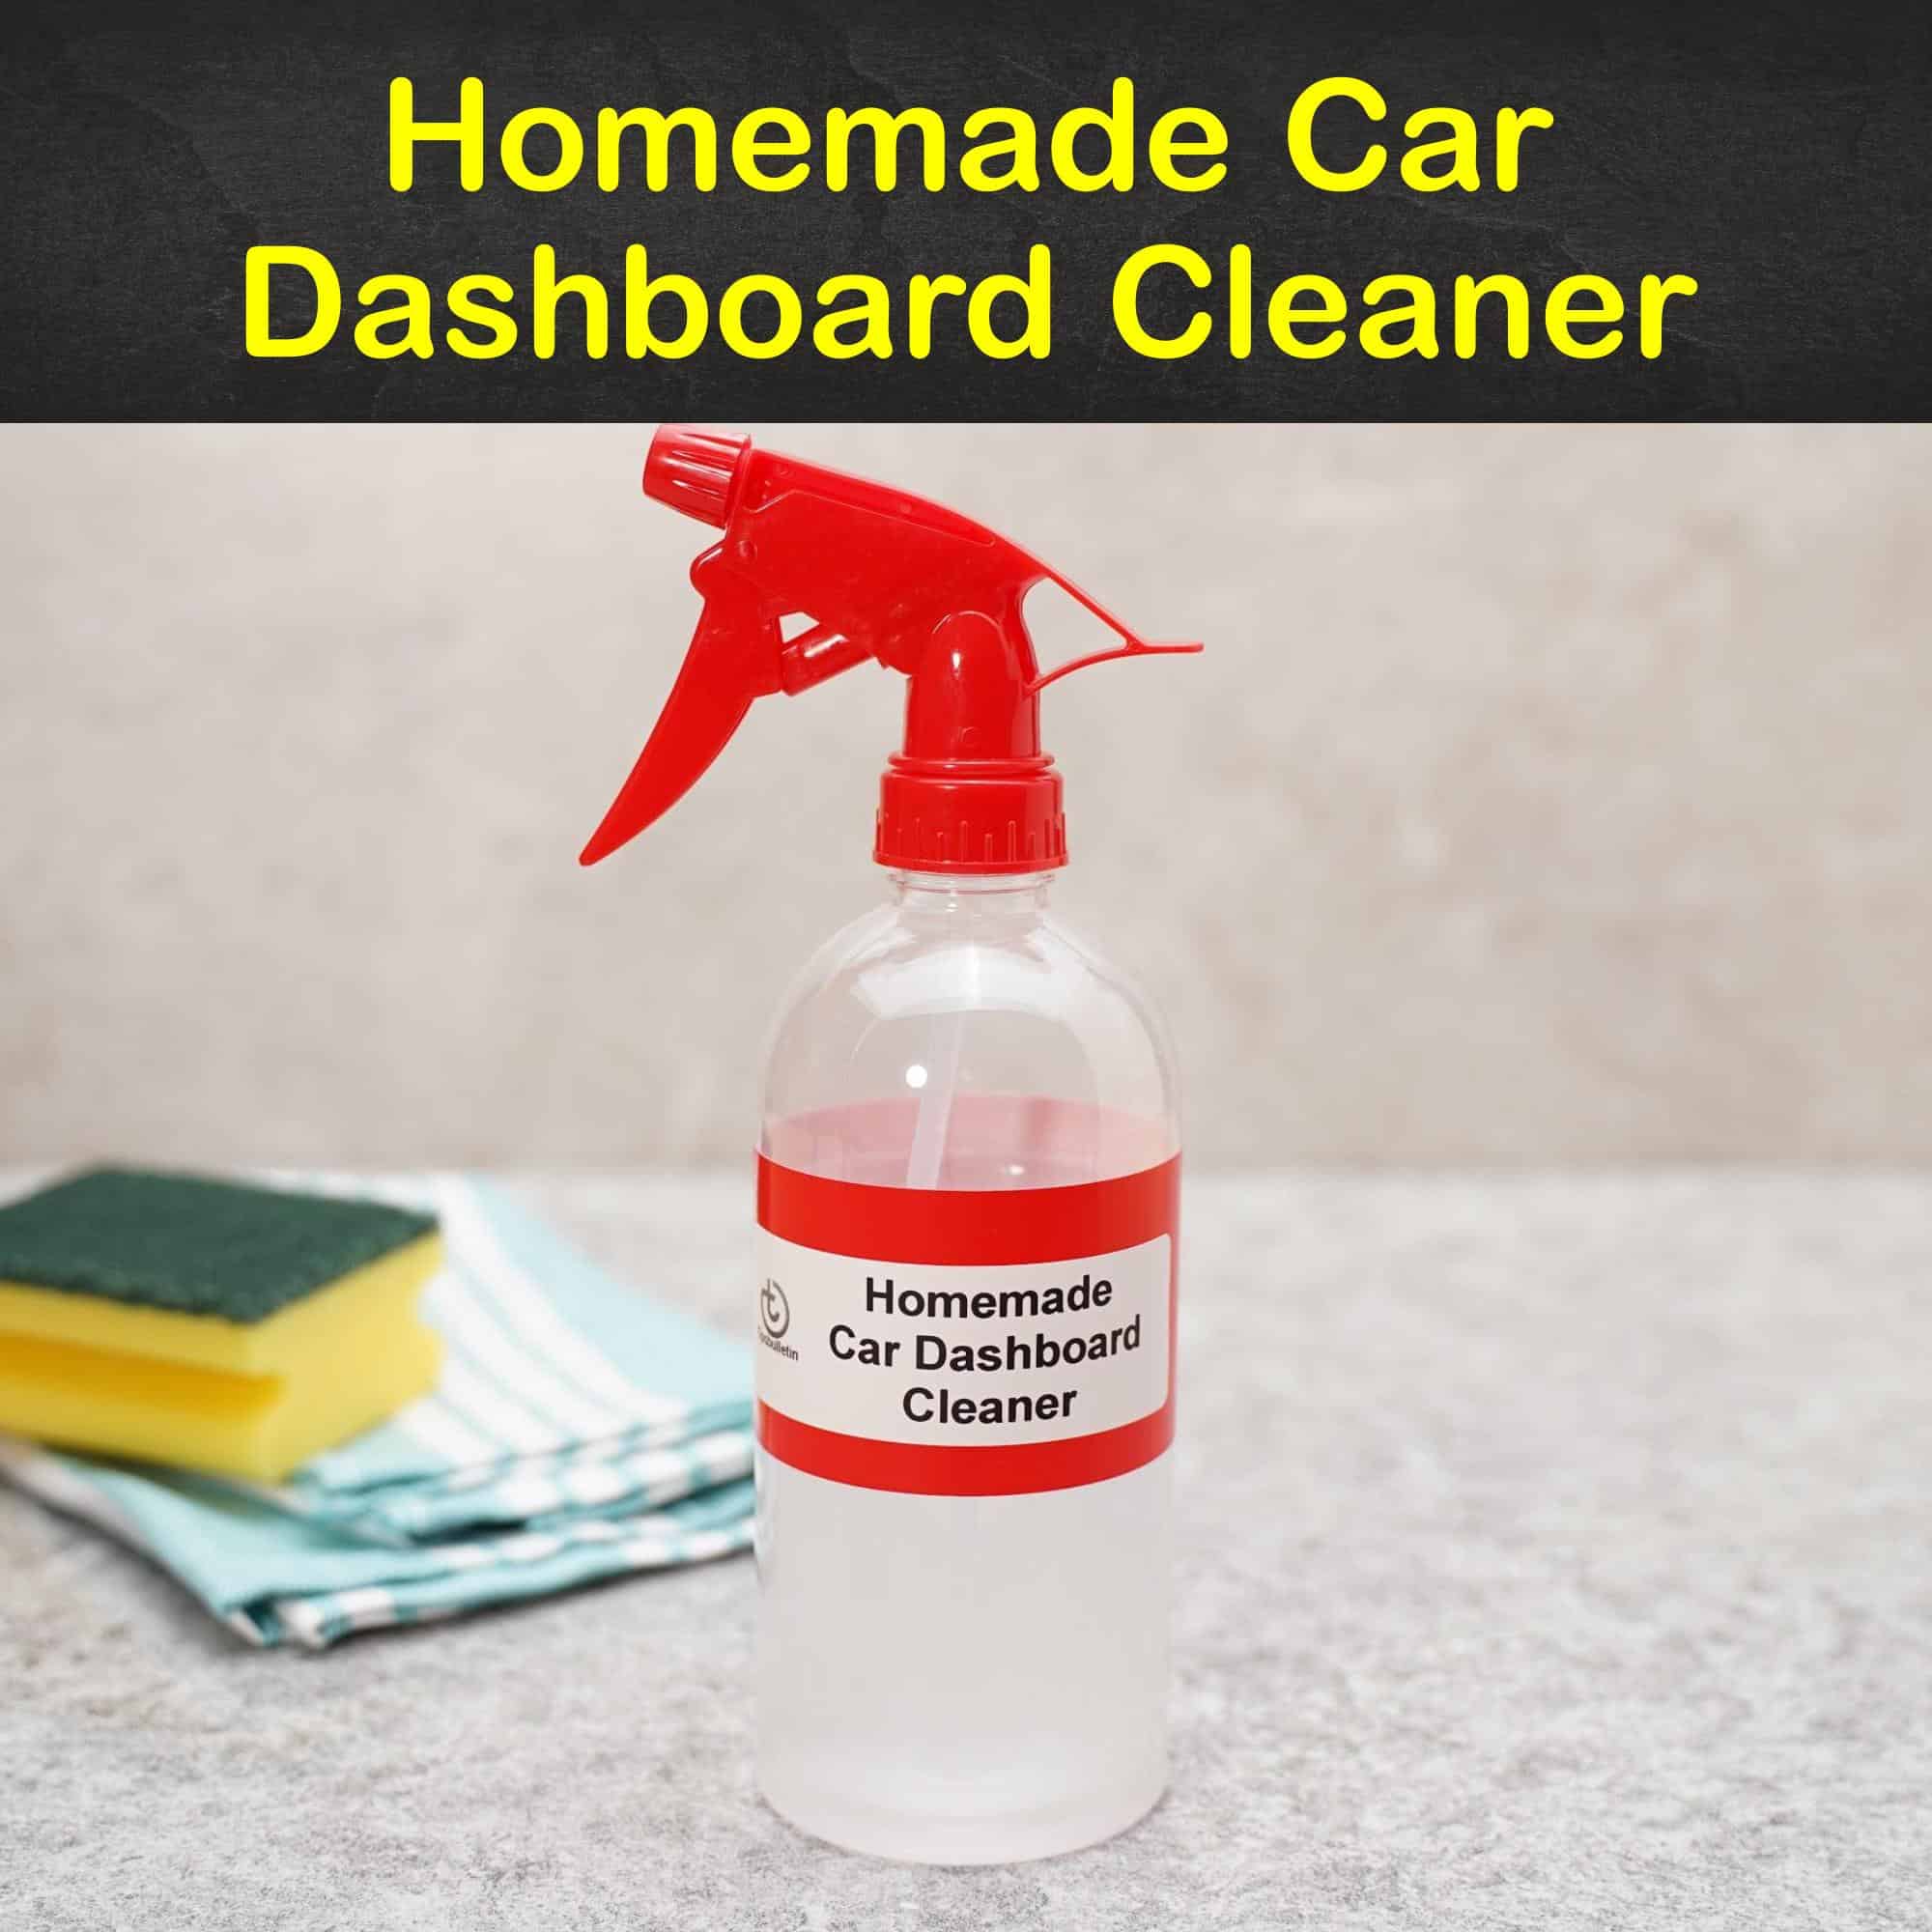 How To Clean My Car's Dashboard